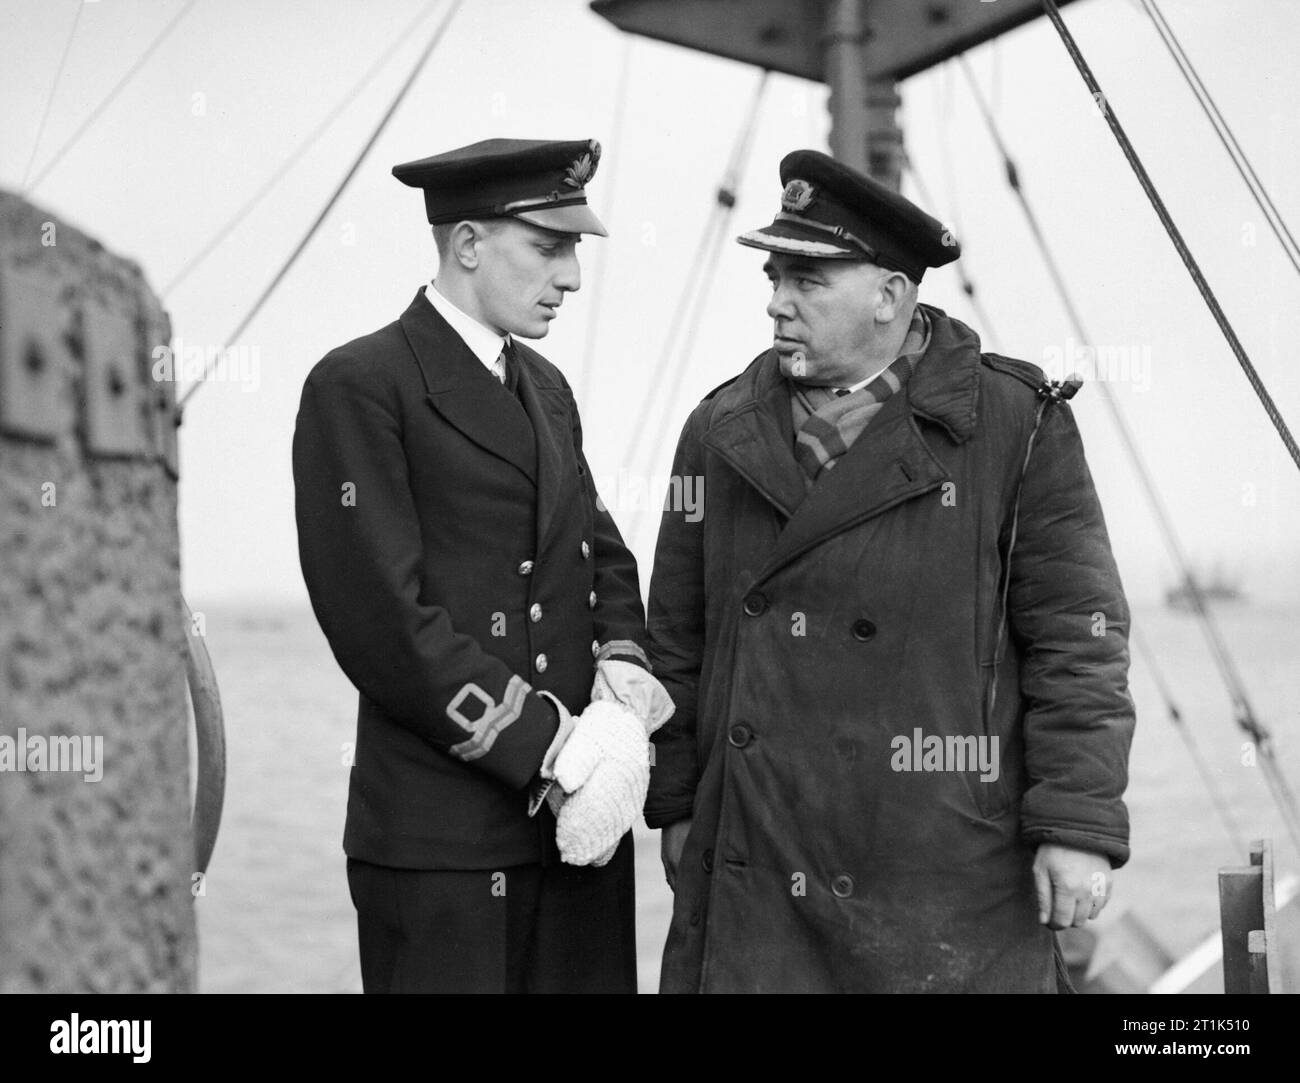 With a Rescue Ship. 19 To 22 February 1943, in the Clyde, Off Greenock, Showing Practice in Progress With the Ss Gothland, One of the Fleet Auxiliary Rescue Ships Which Sailed With Convoys When the U-boat War Was at Its Height. Right to left: Captain John Hadden with Surgeon Lieutenant J McKenzie, RNVR, the ship's doctor. Stock Photo